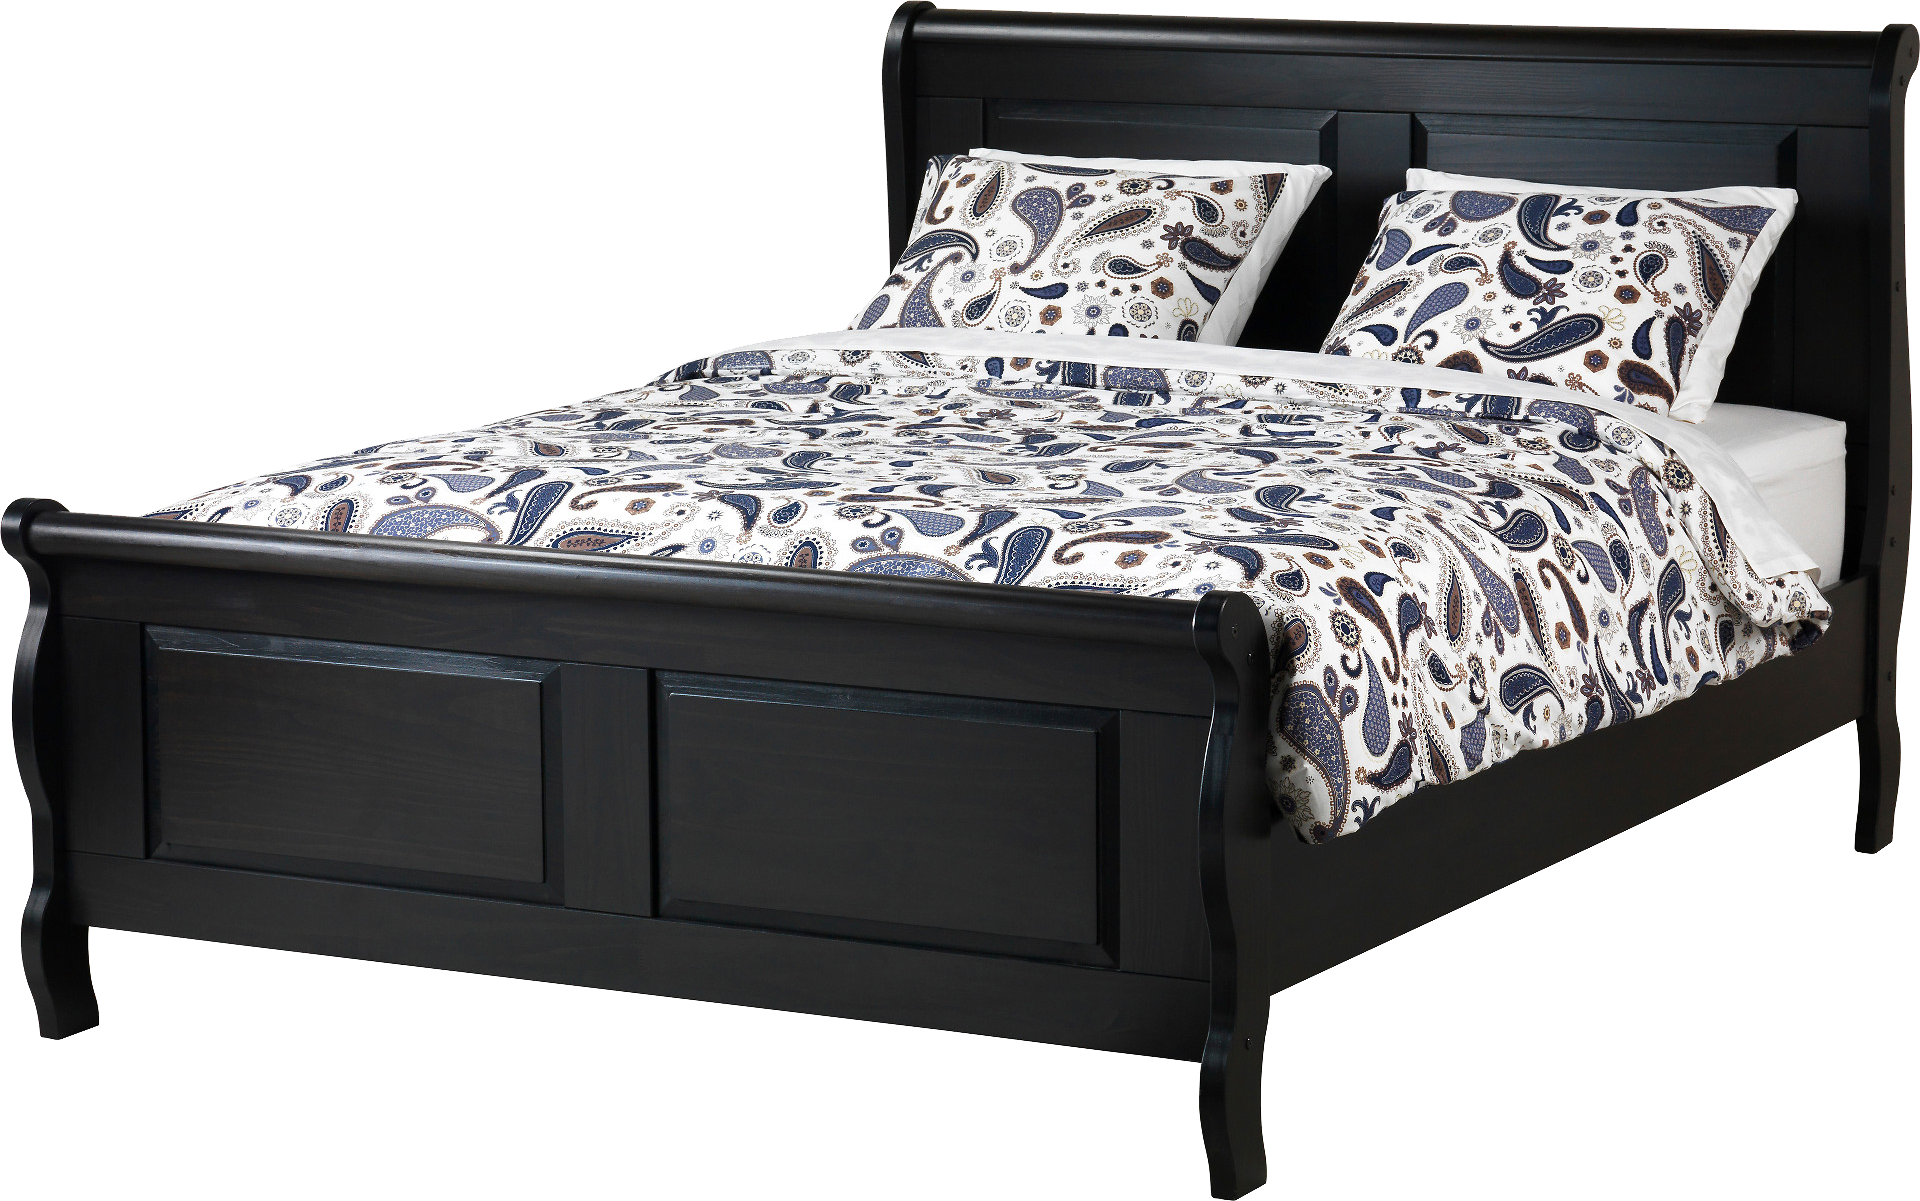 bed PNG17410 